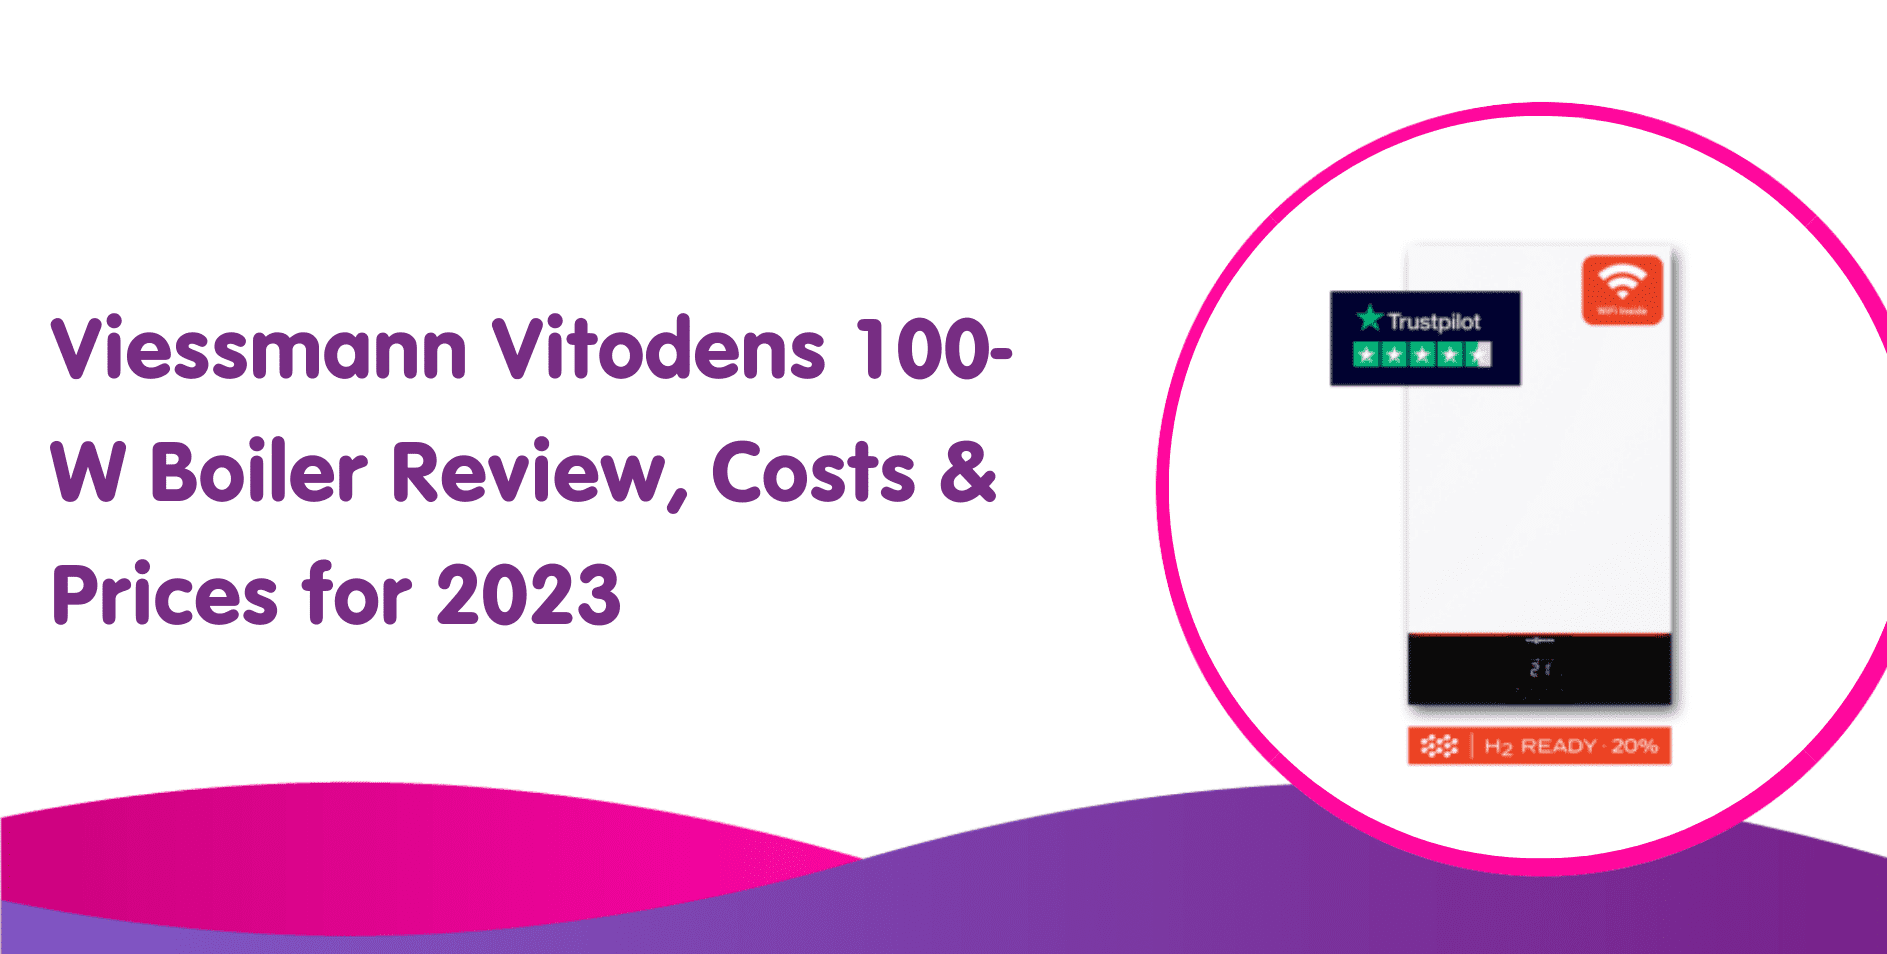 Viessmann Vitodens 100-W Boiler Review, Costs & Prices for 2023